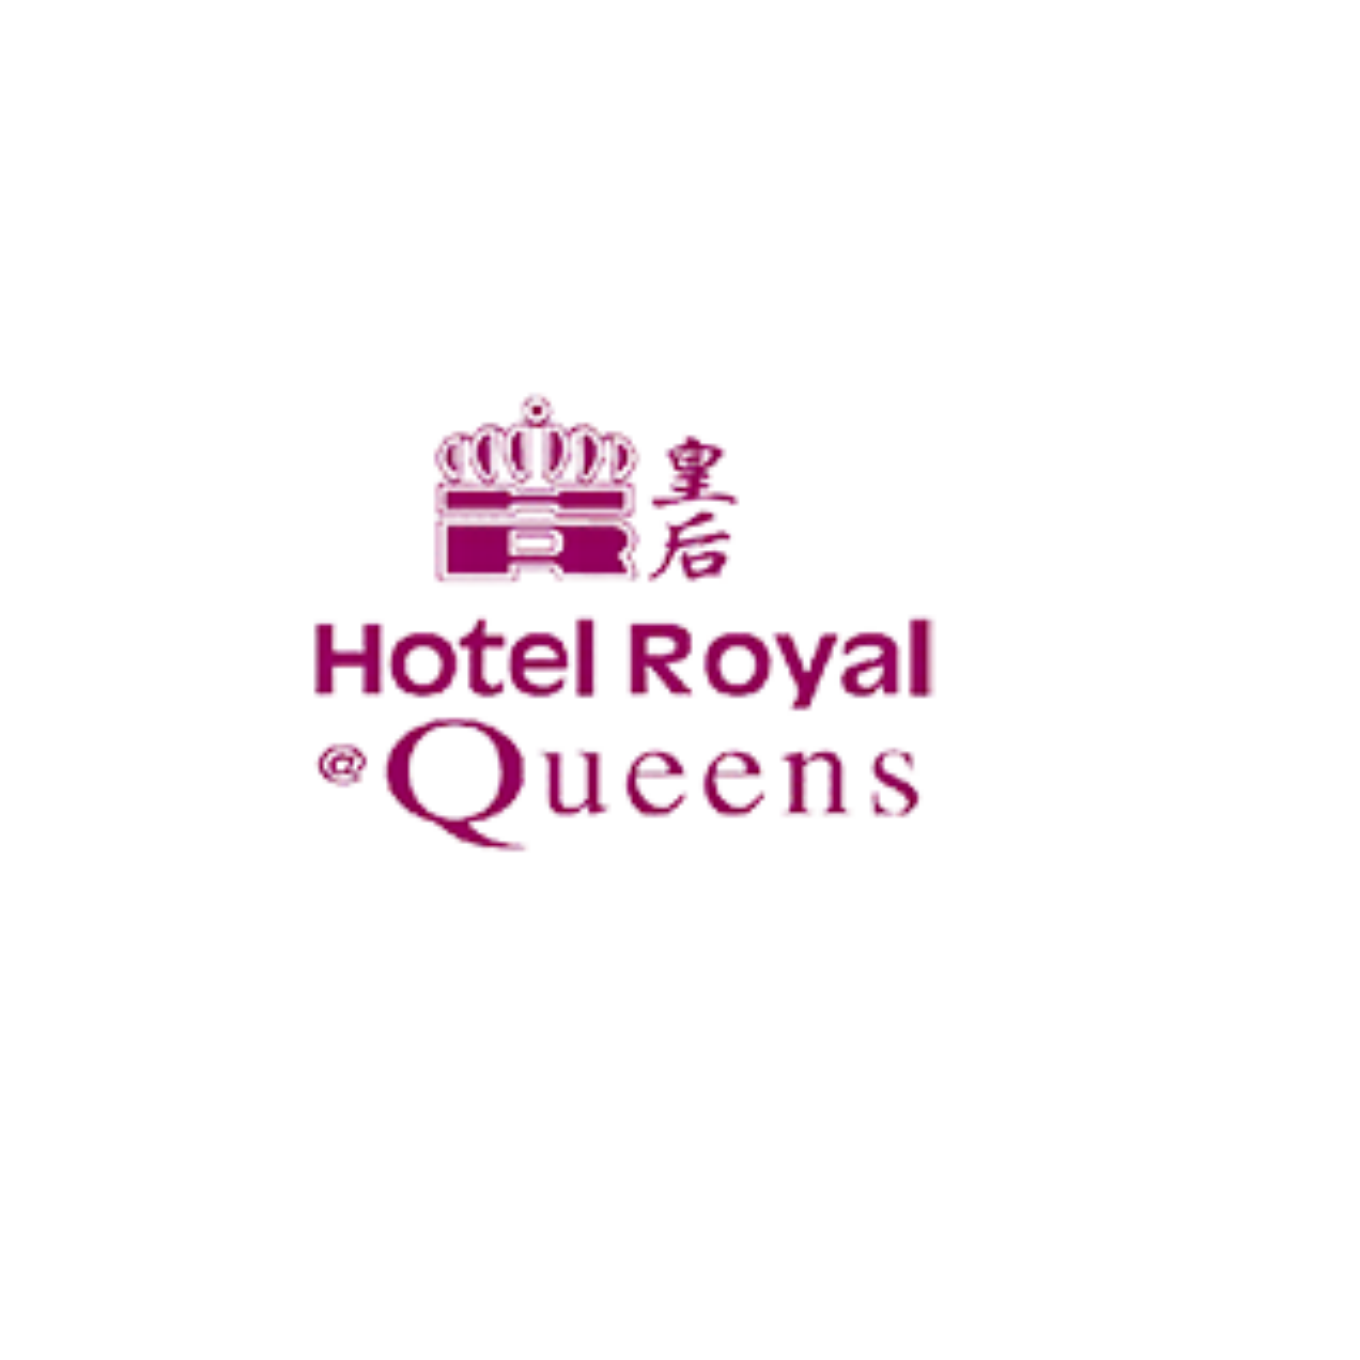 Get Up To 50% Off With These Hotel Royal @ Queens